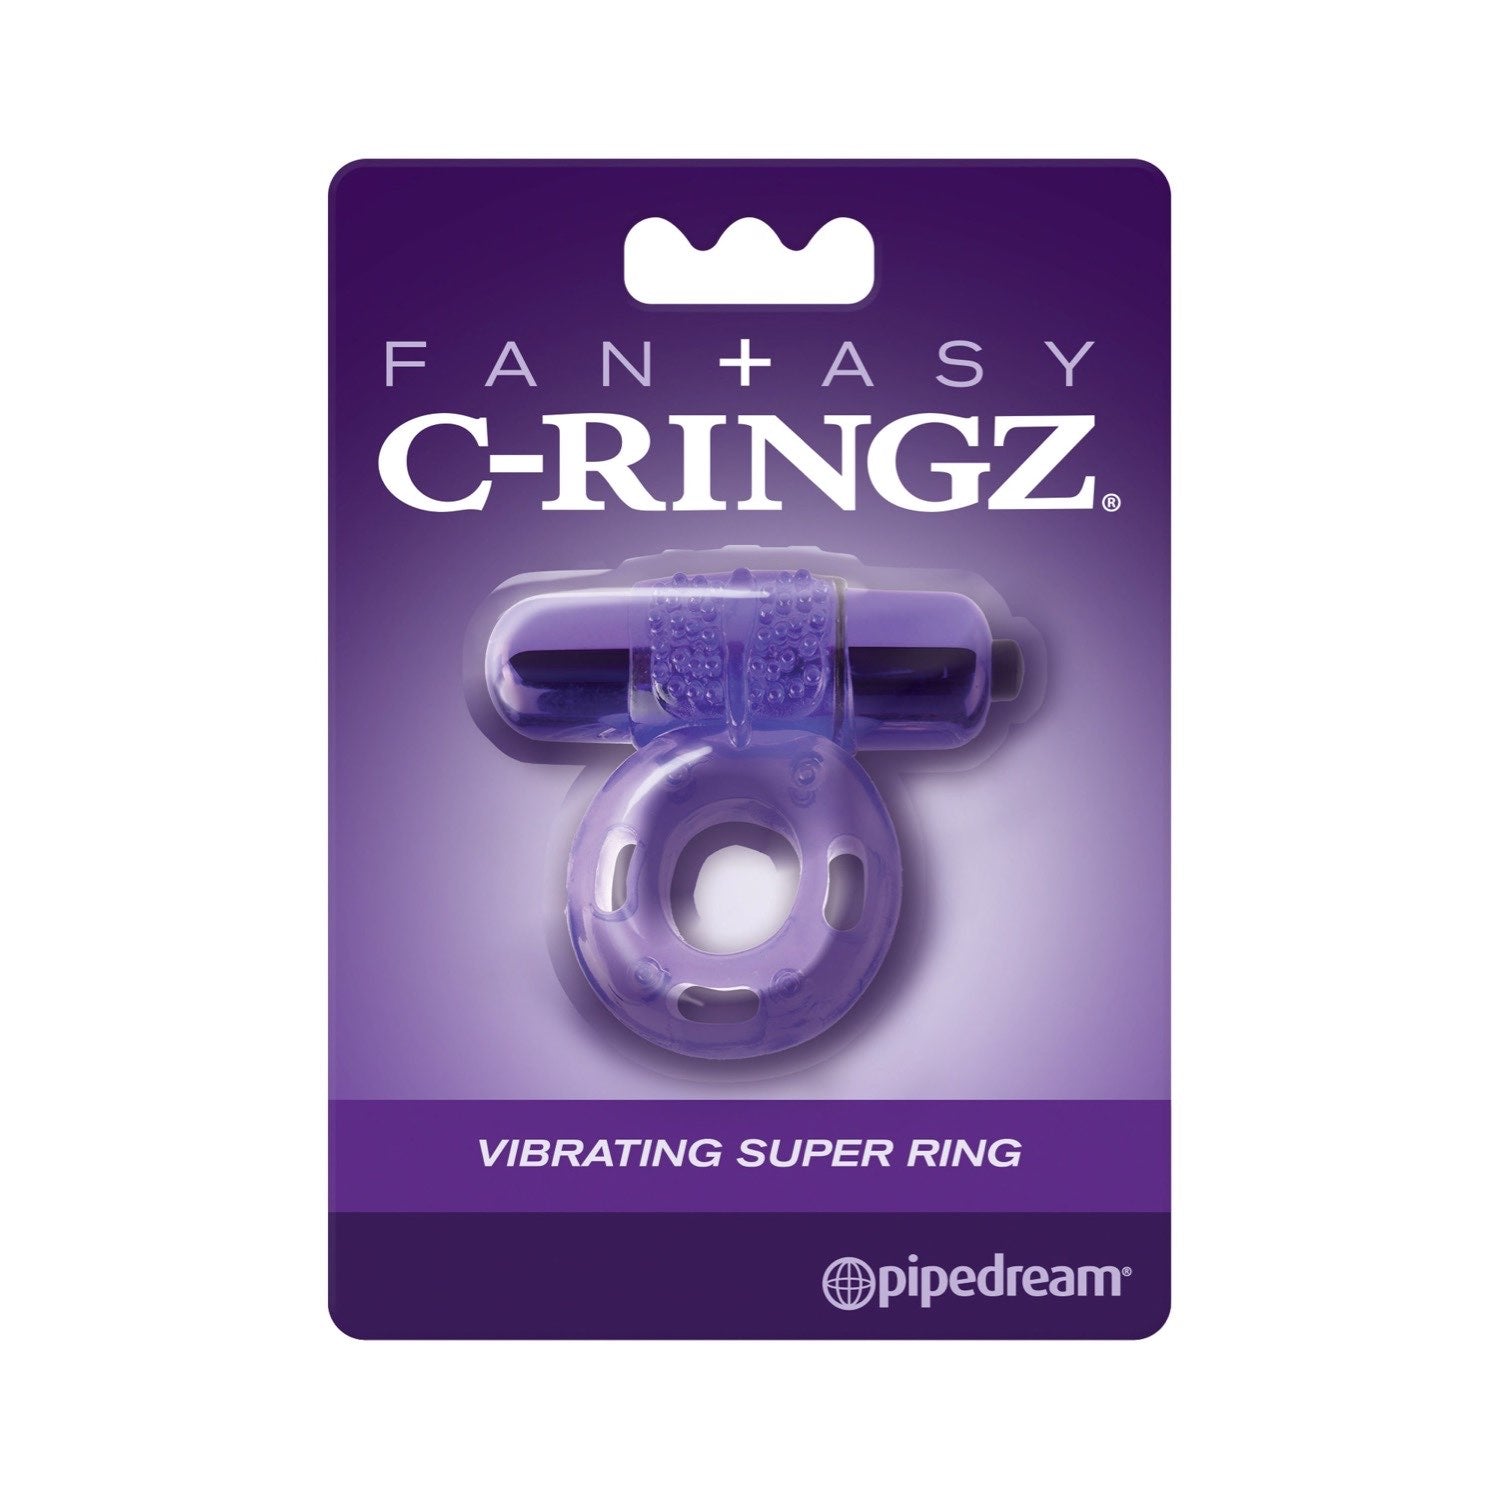 Fantasy C-Ringz Vibrating Super Ring - Purple Vibrating Cock Ring by Pipedream